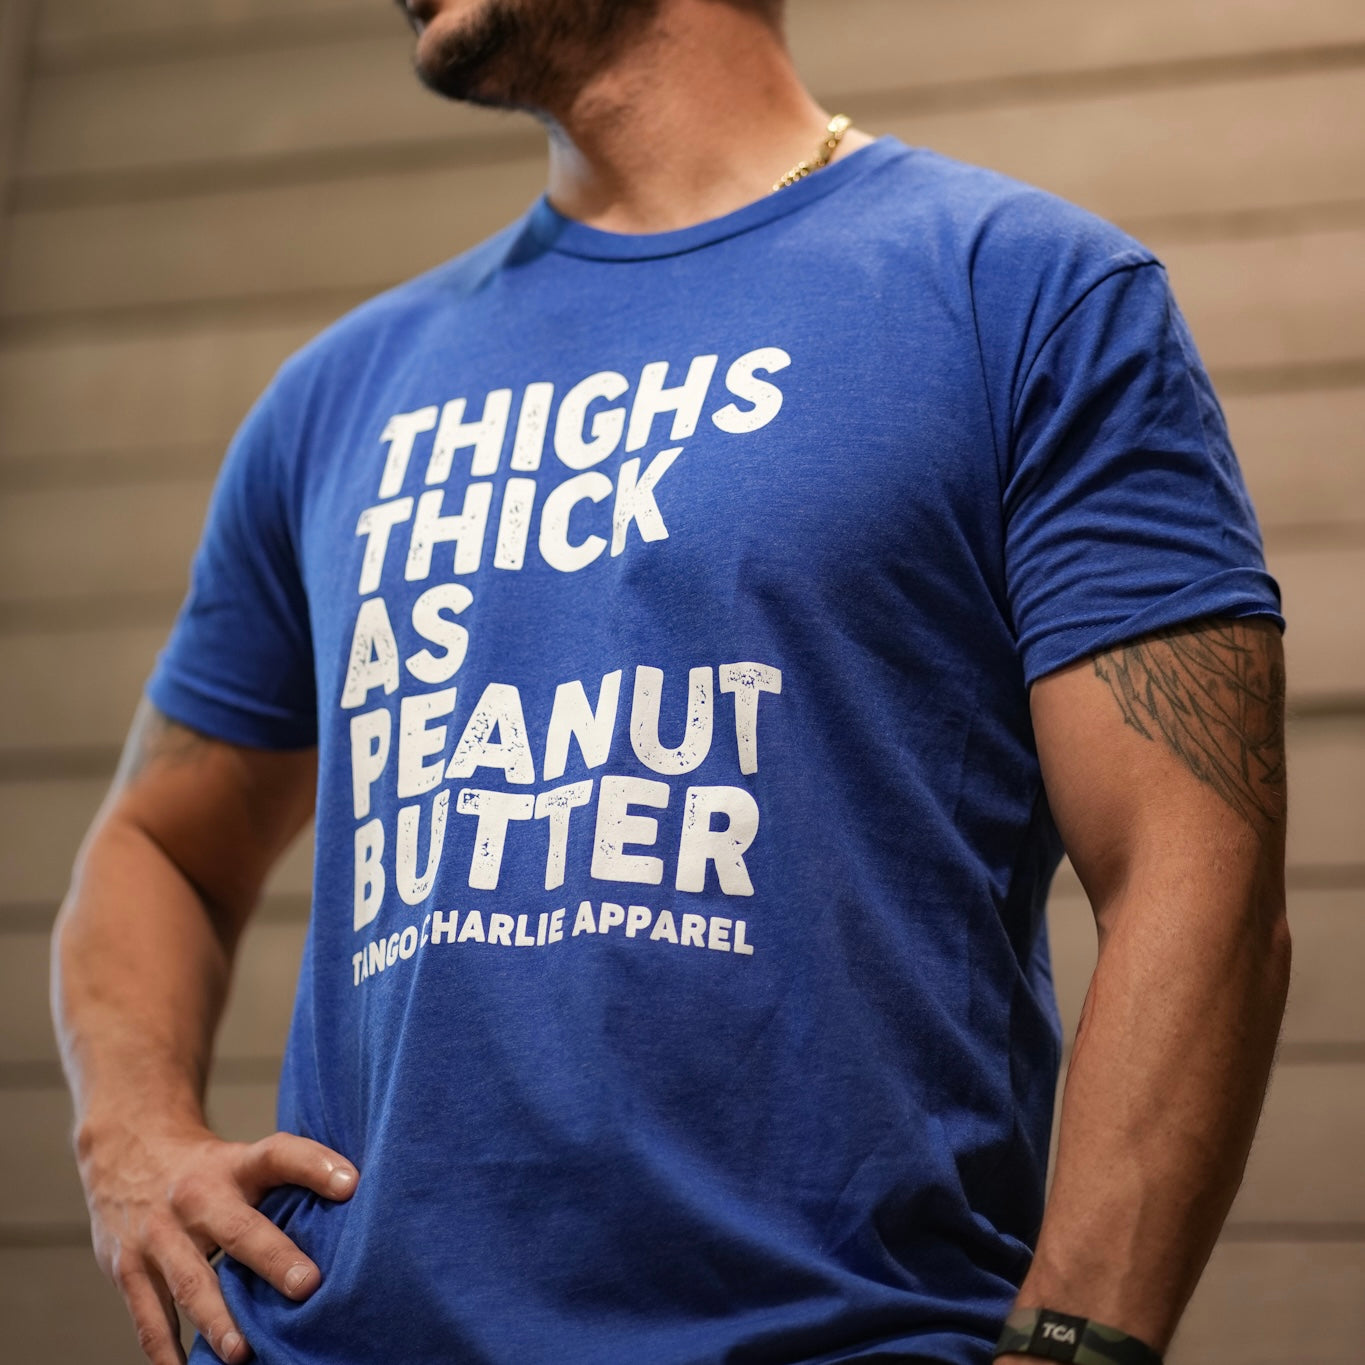 "Thighs Thick as Peanut Butter" - Men's Tee